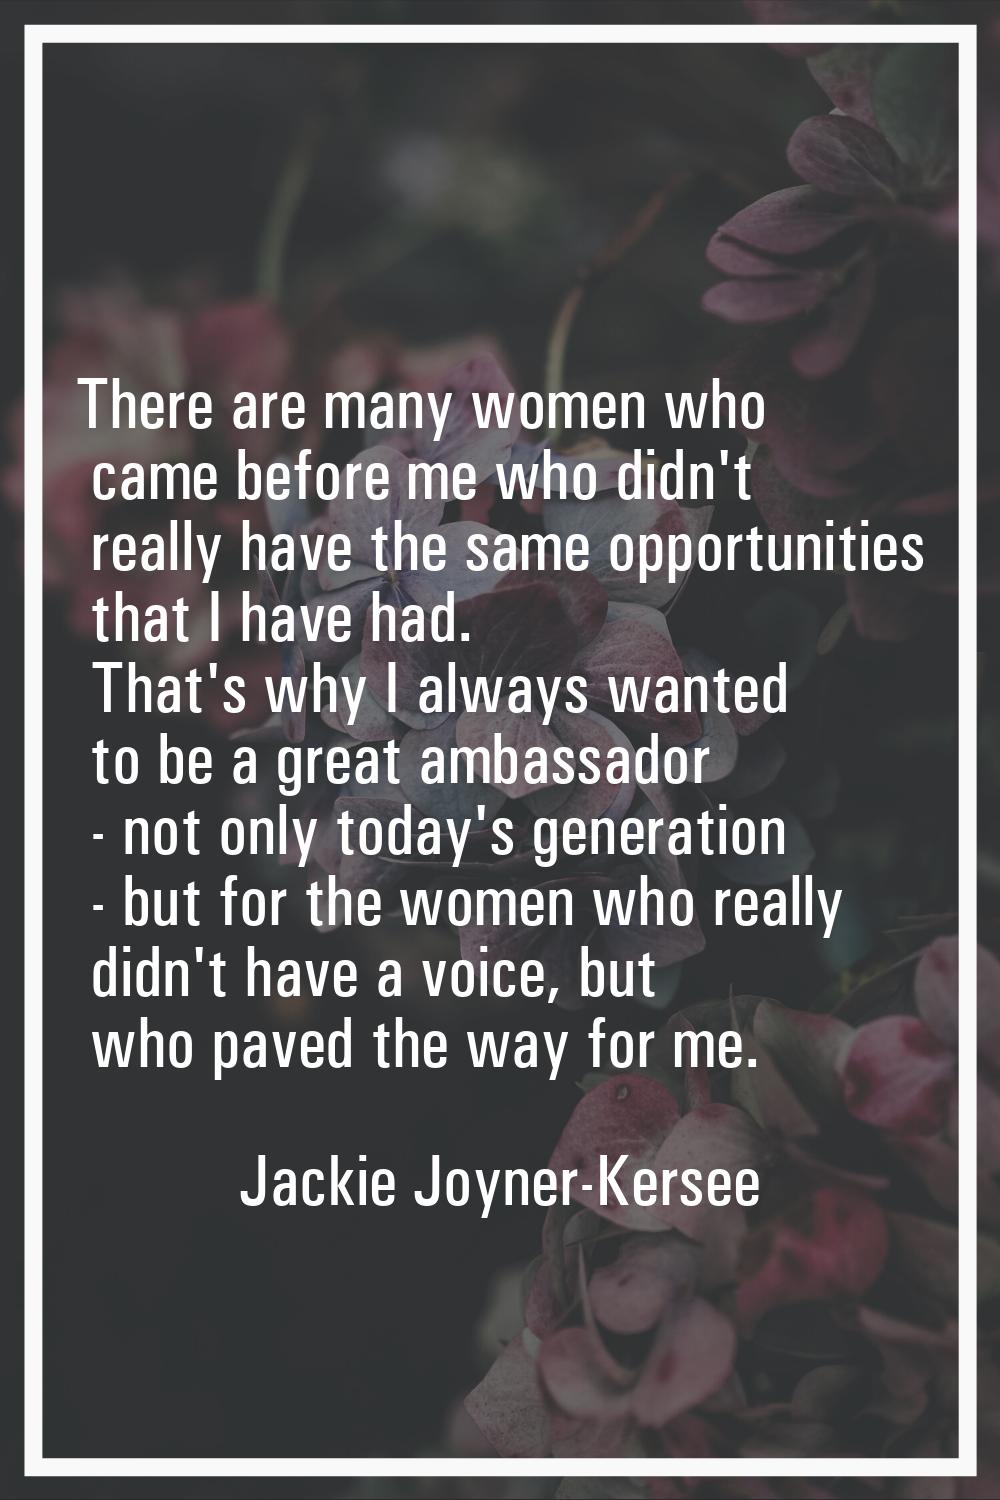 There are many women who came before me who didn't really have the same opportunities that I have h